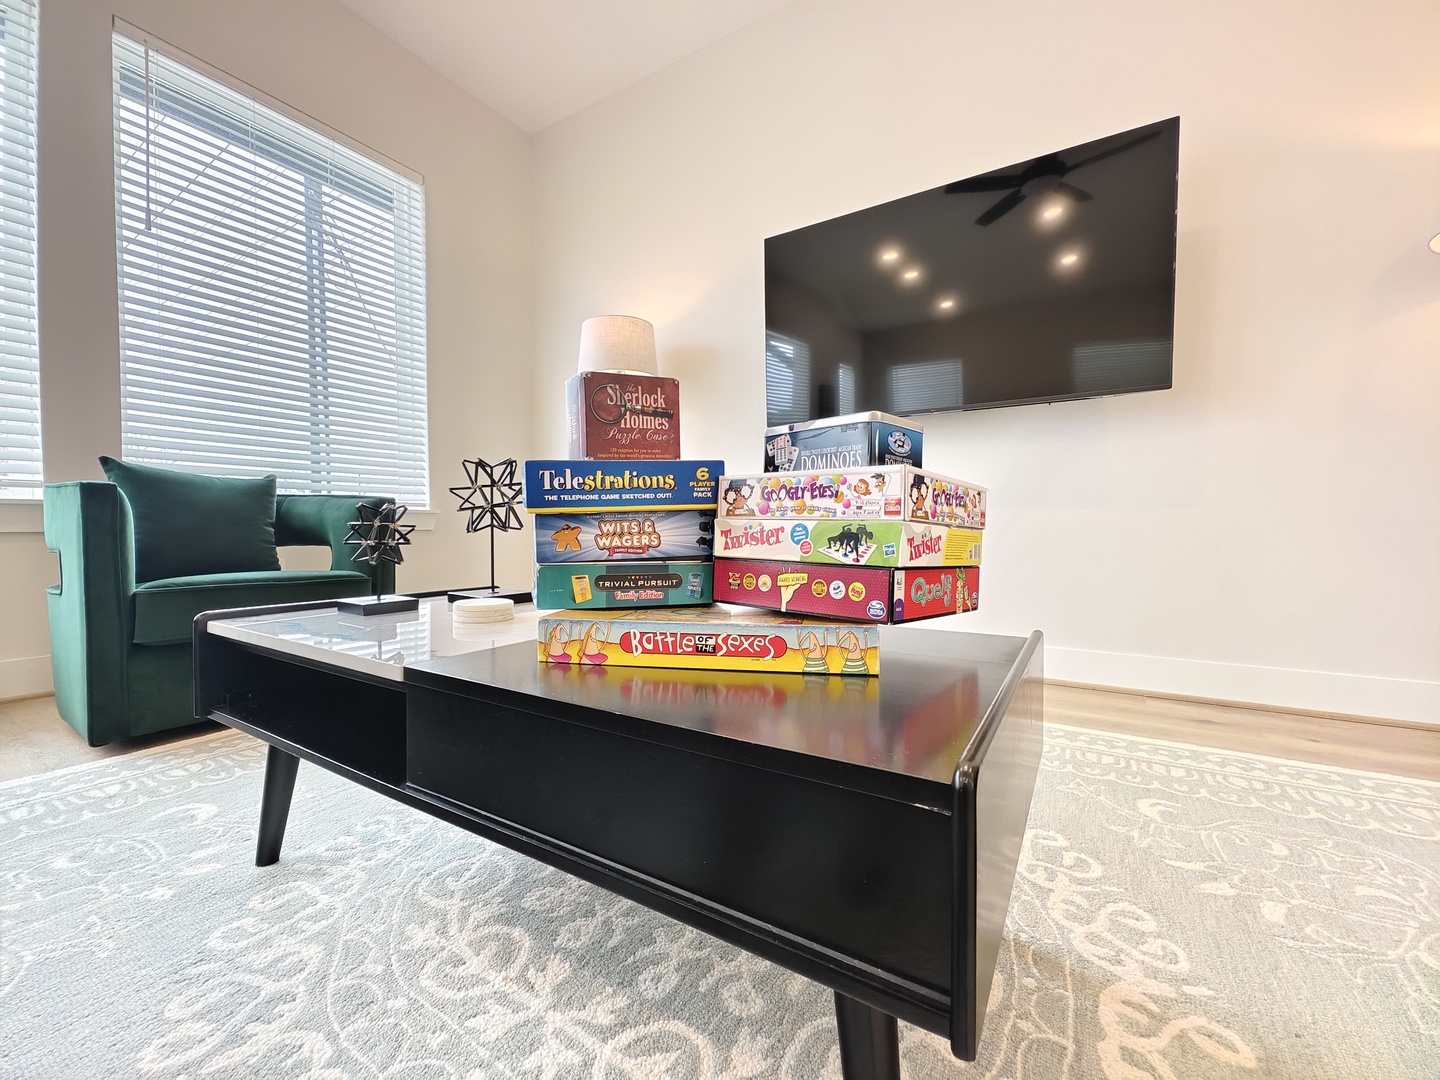 Game night perfection: board games & Smart TV for family fun!